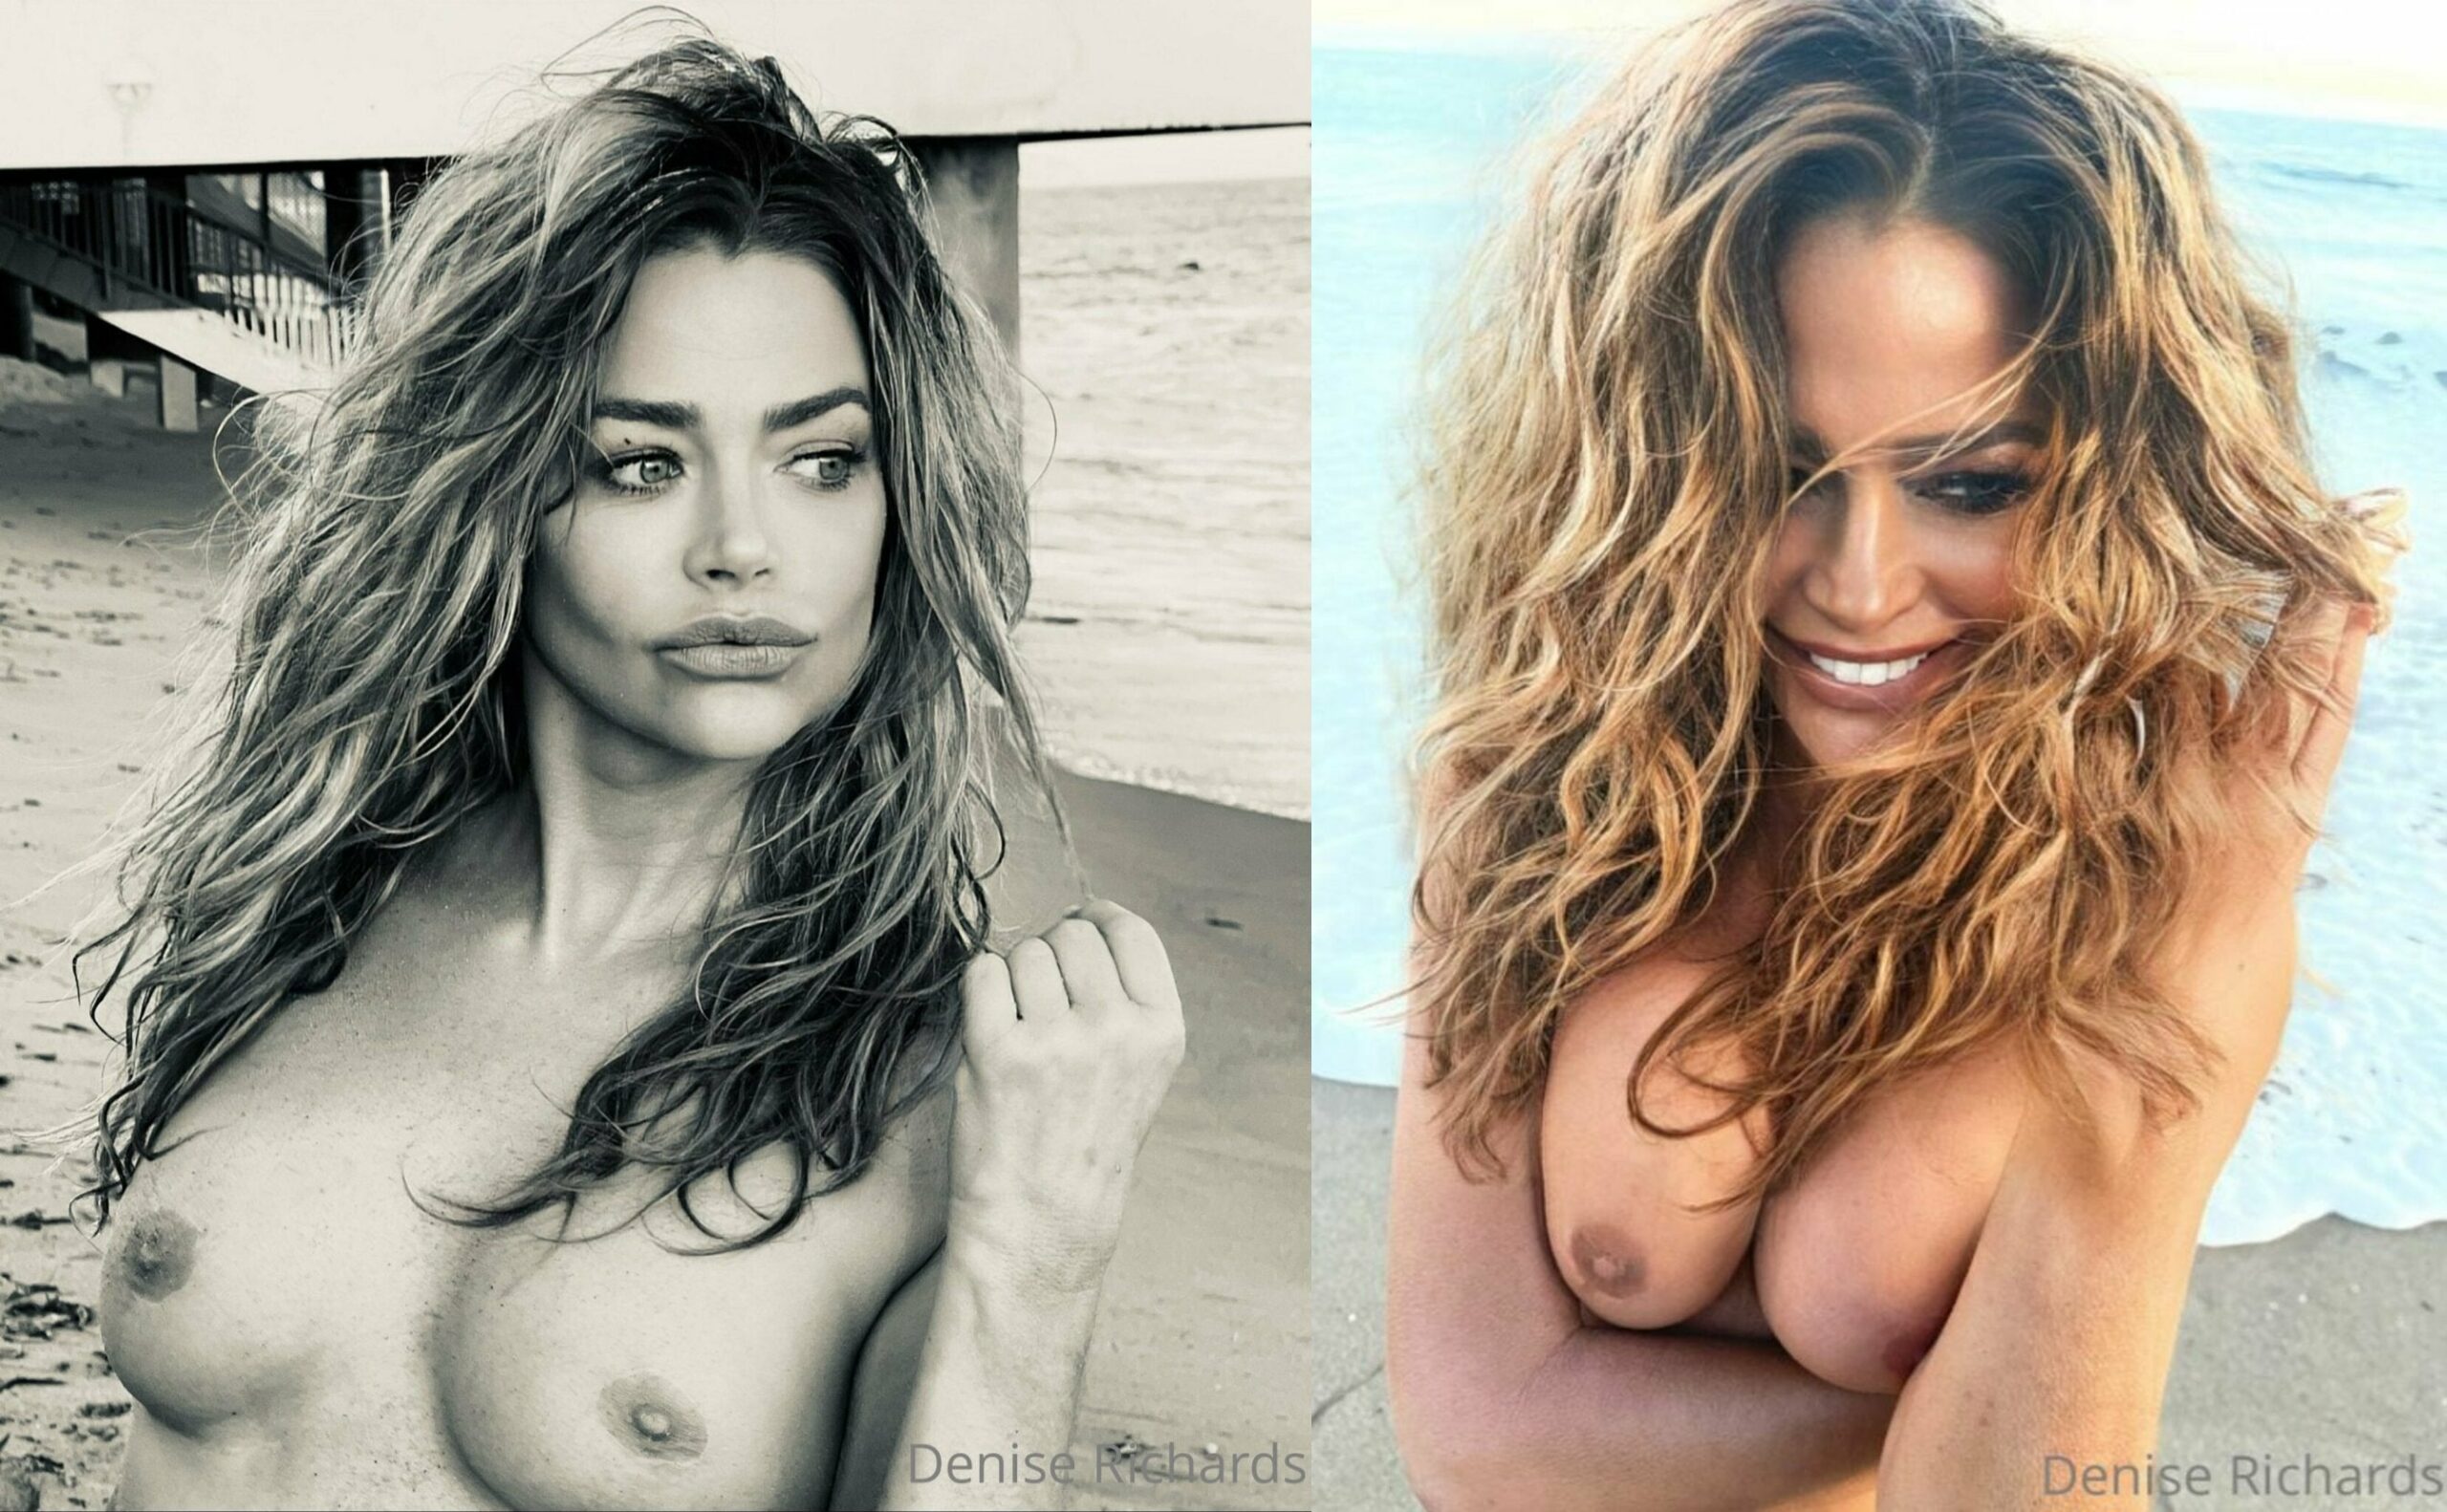 Denise Richards - 1st nudity in 14 years! - Nude Celebs